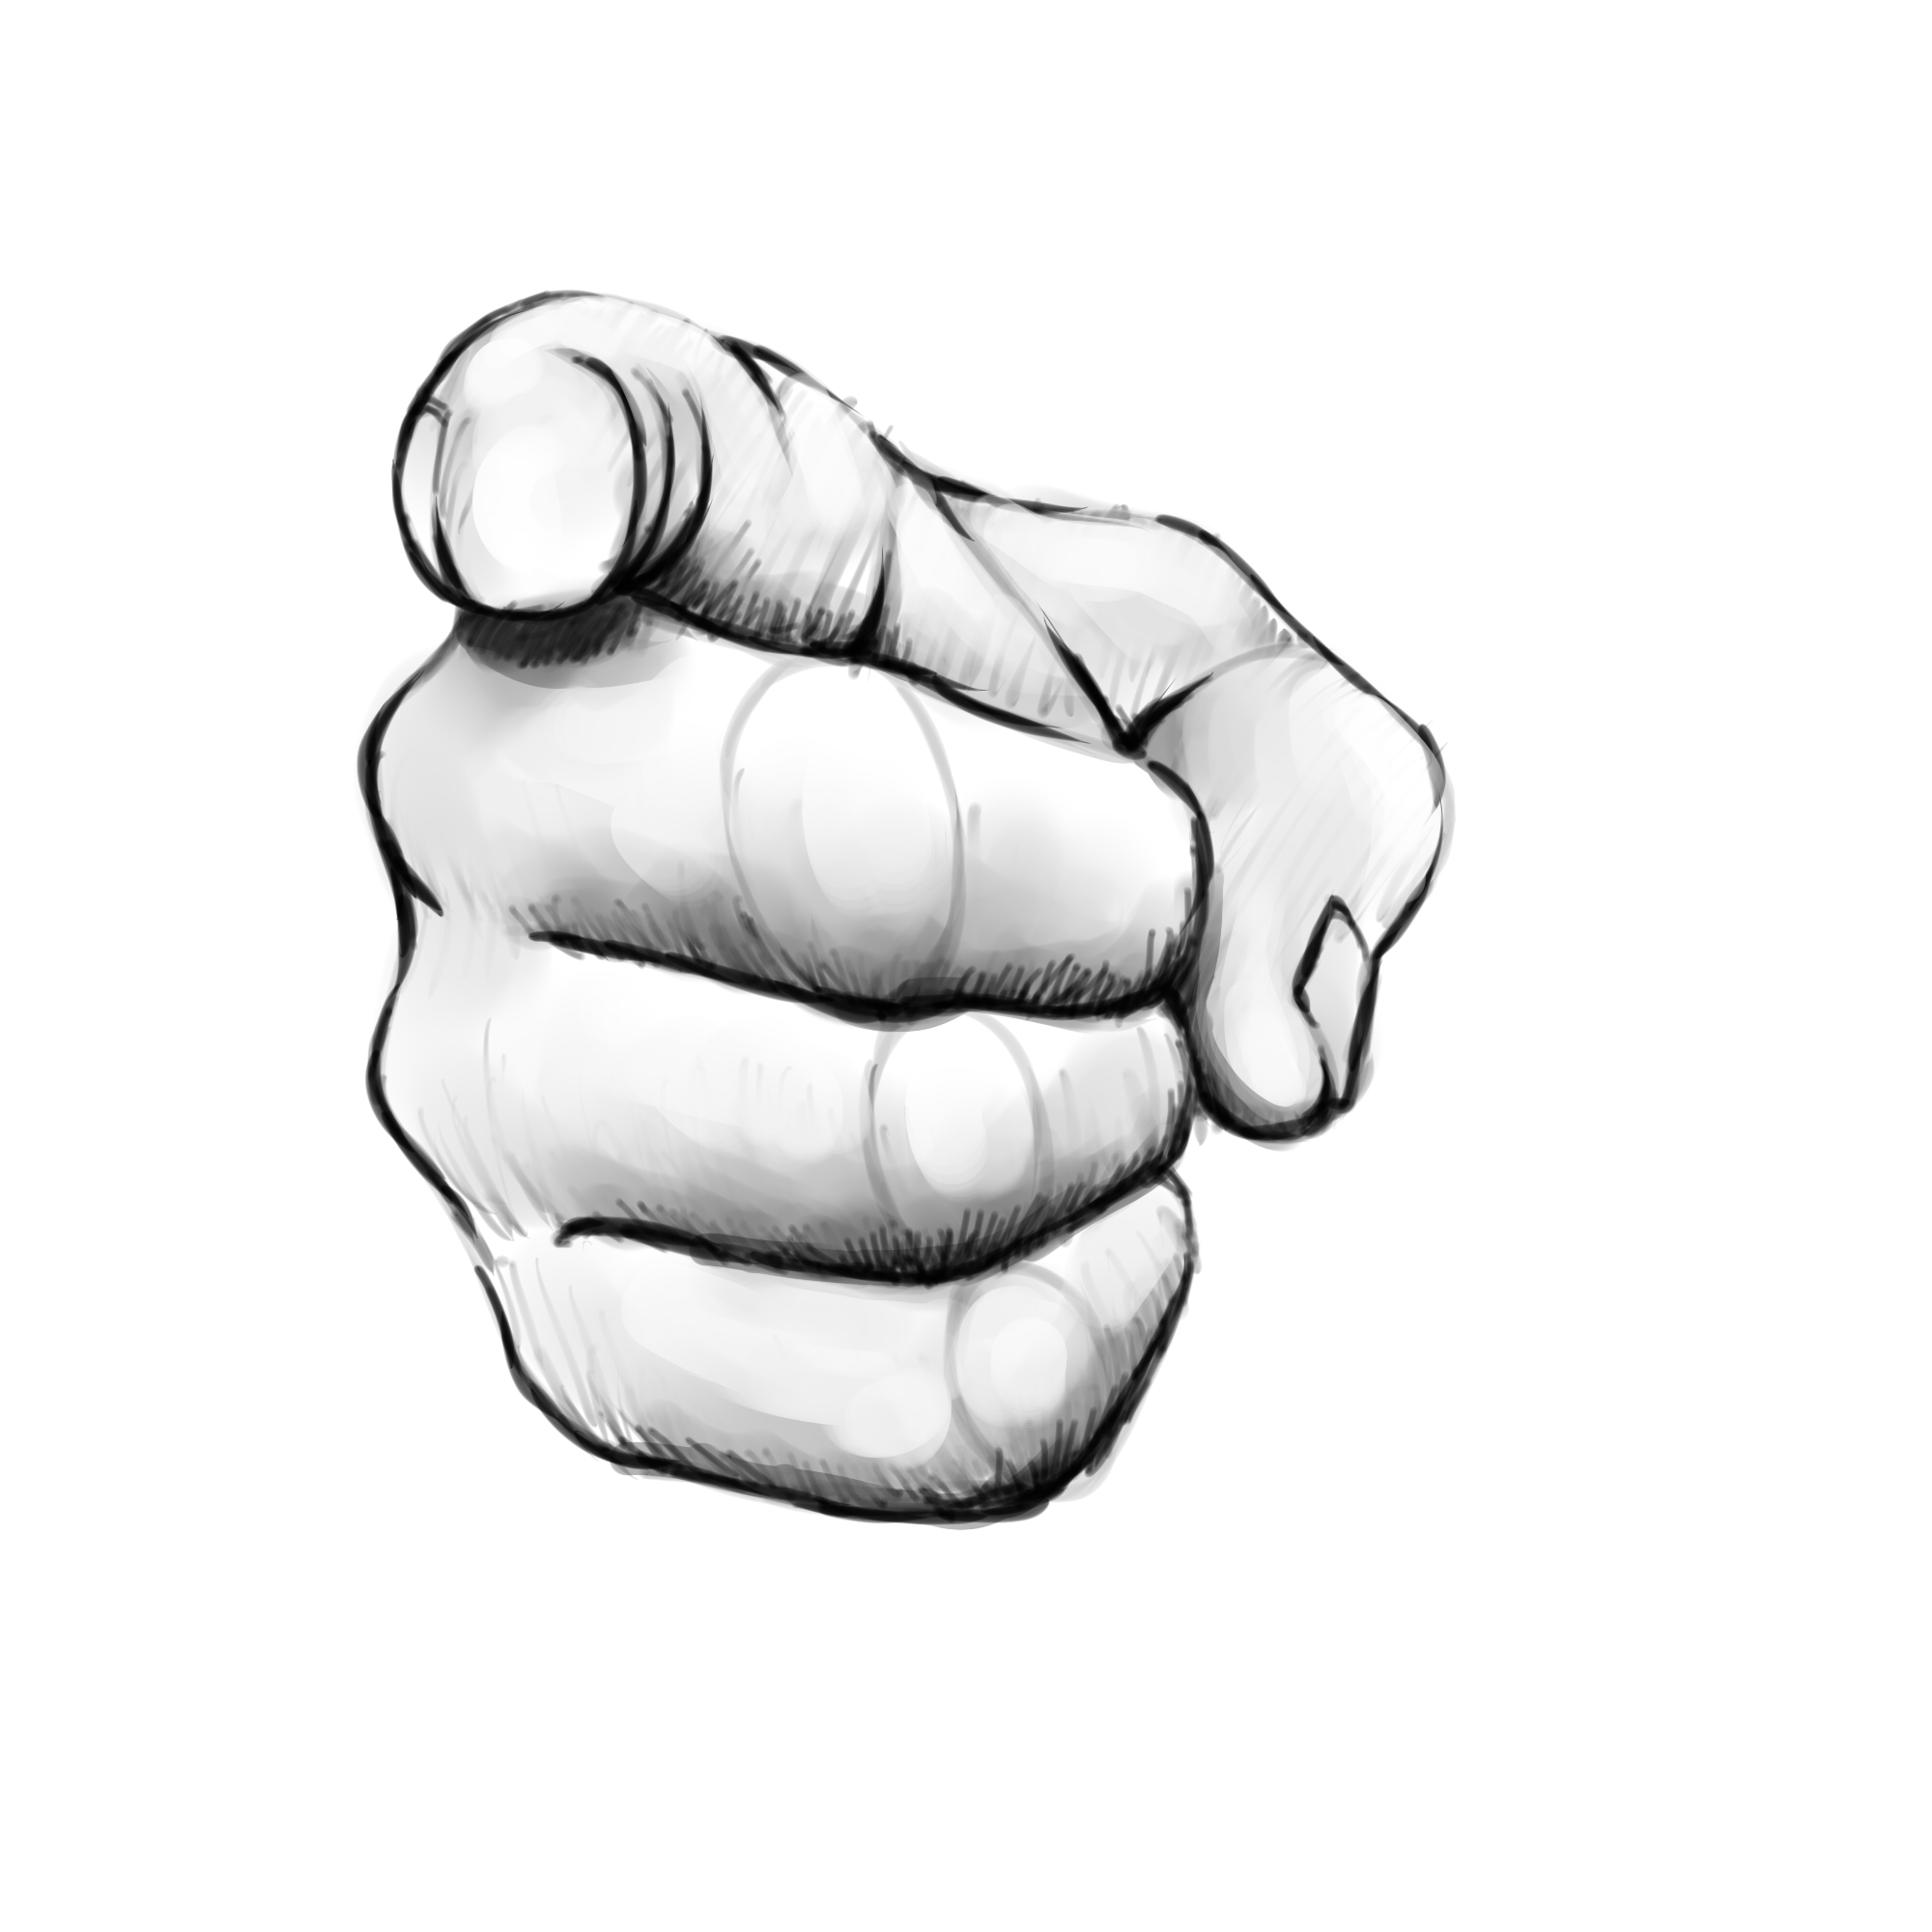 pointing finger at you clip art